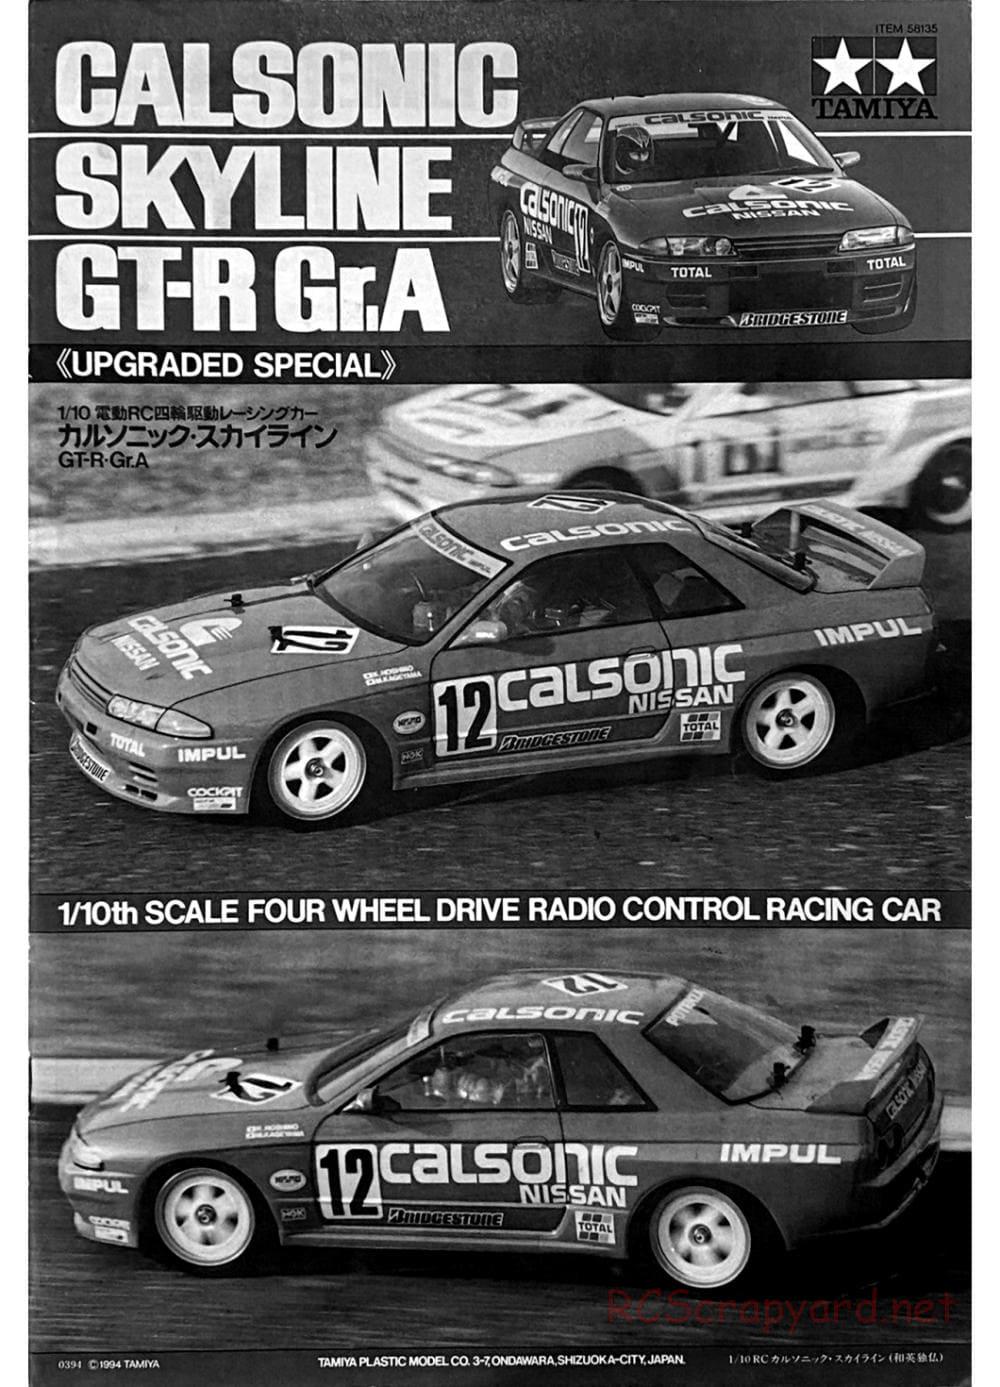 Tamiya - Calsonic Skyline GT-R Gr.A - TA-02 Chassis - Manual - Page 1